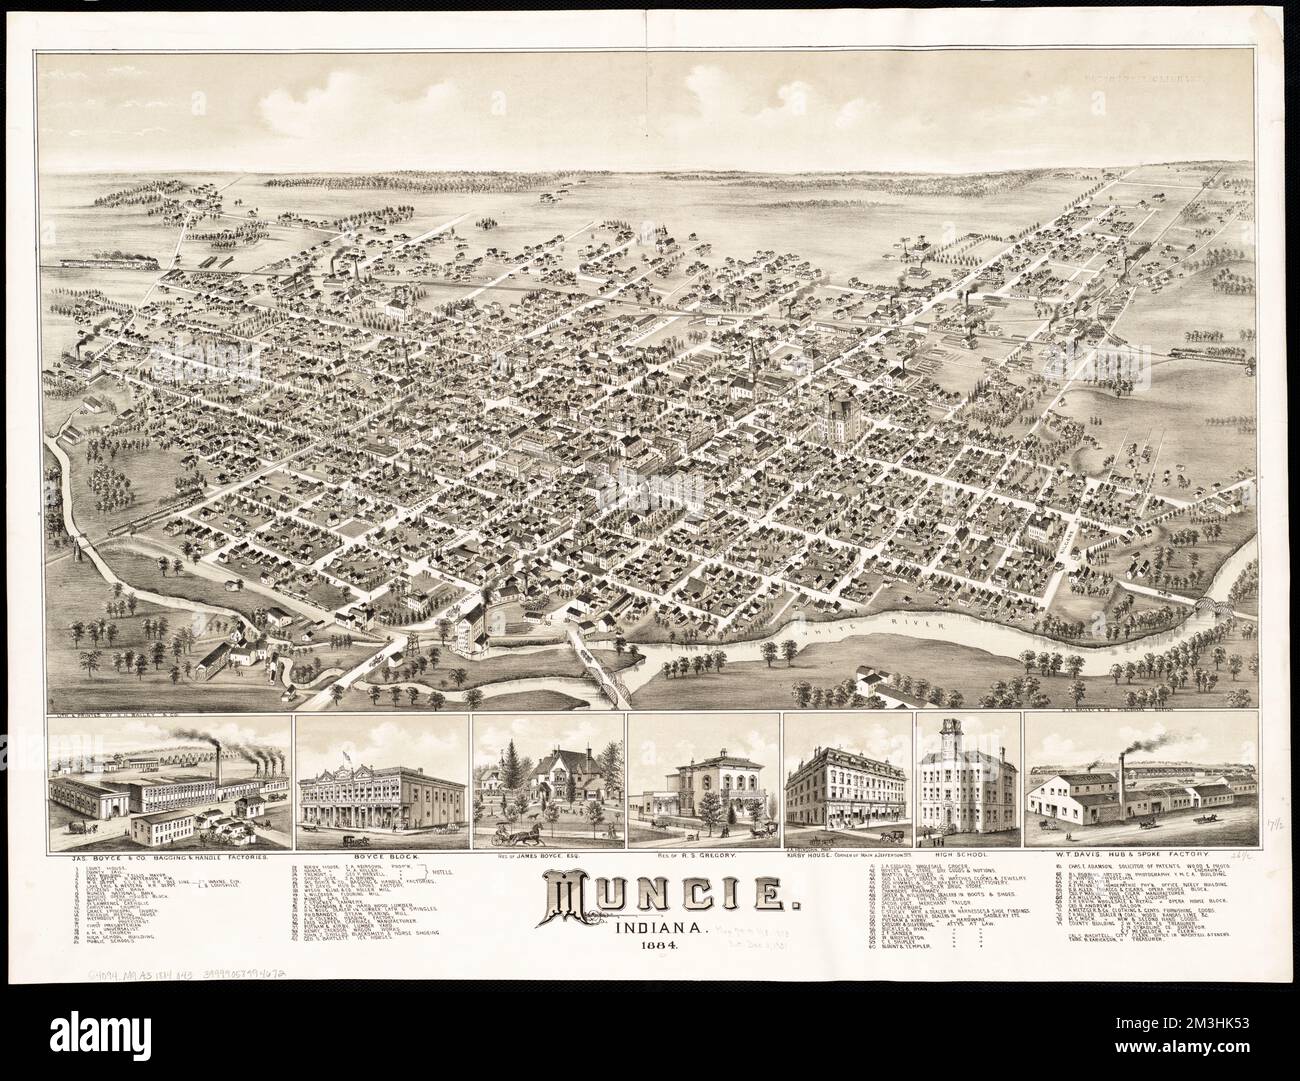 Muncie, Indiana : 1884 , Muncie Ind., Aerial views Norman B. Leventhal Map Center Collection Foto Stock